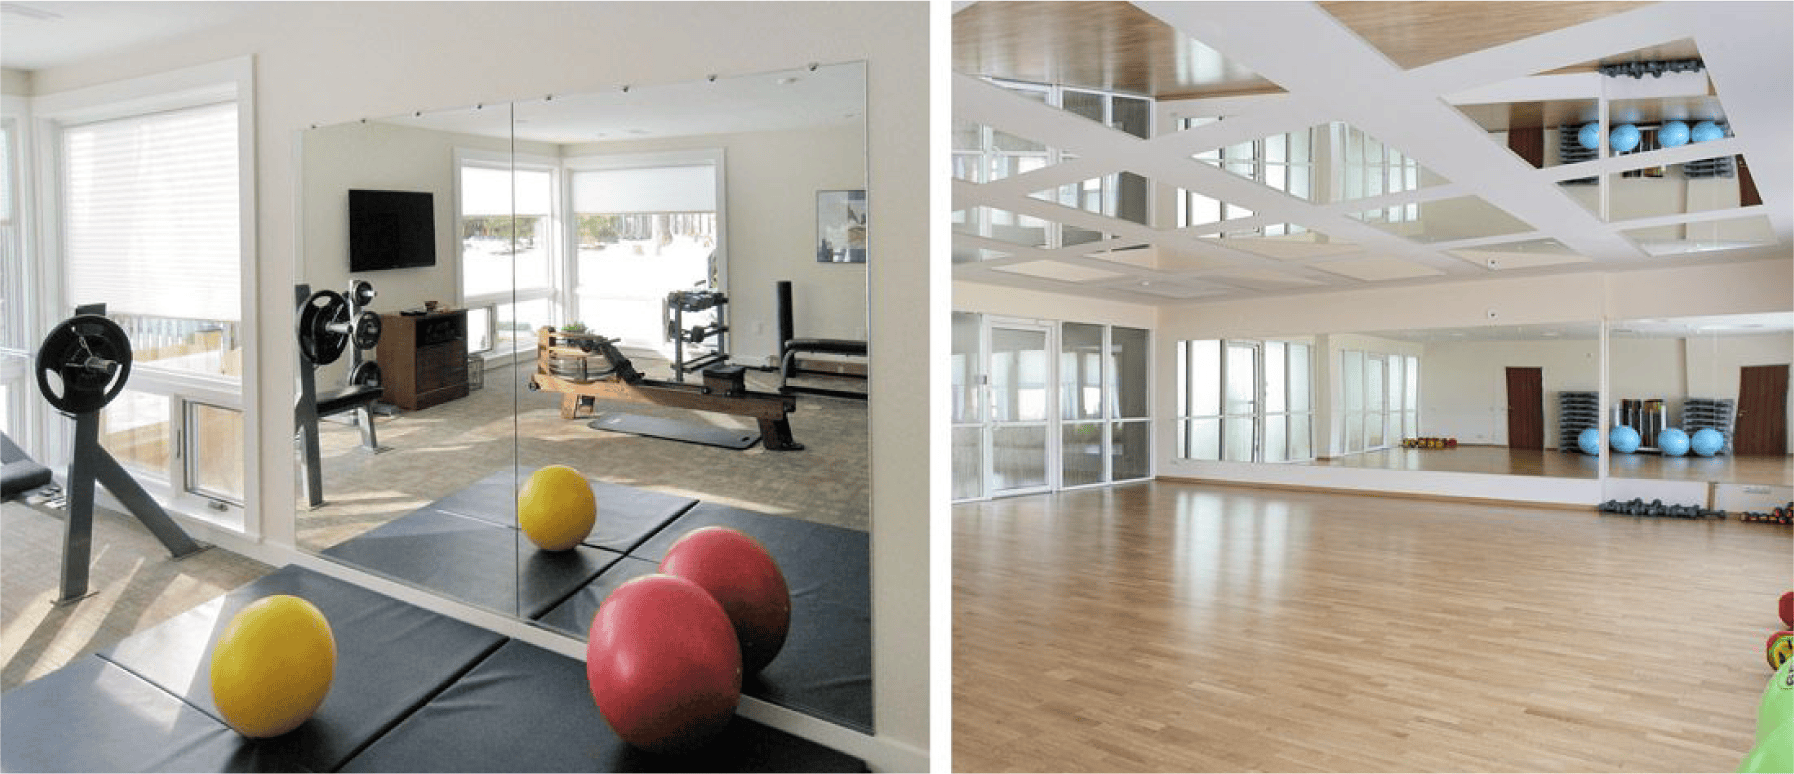 Two gym rooms with exercise equipment and mirrors for fitness enthusiasts.